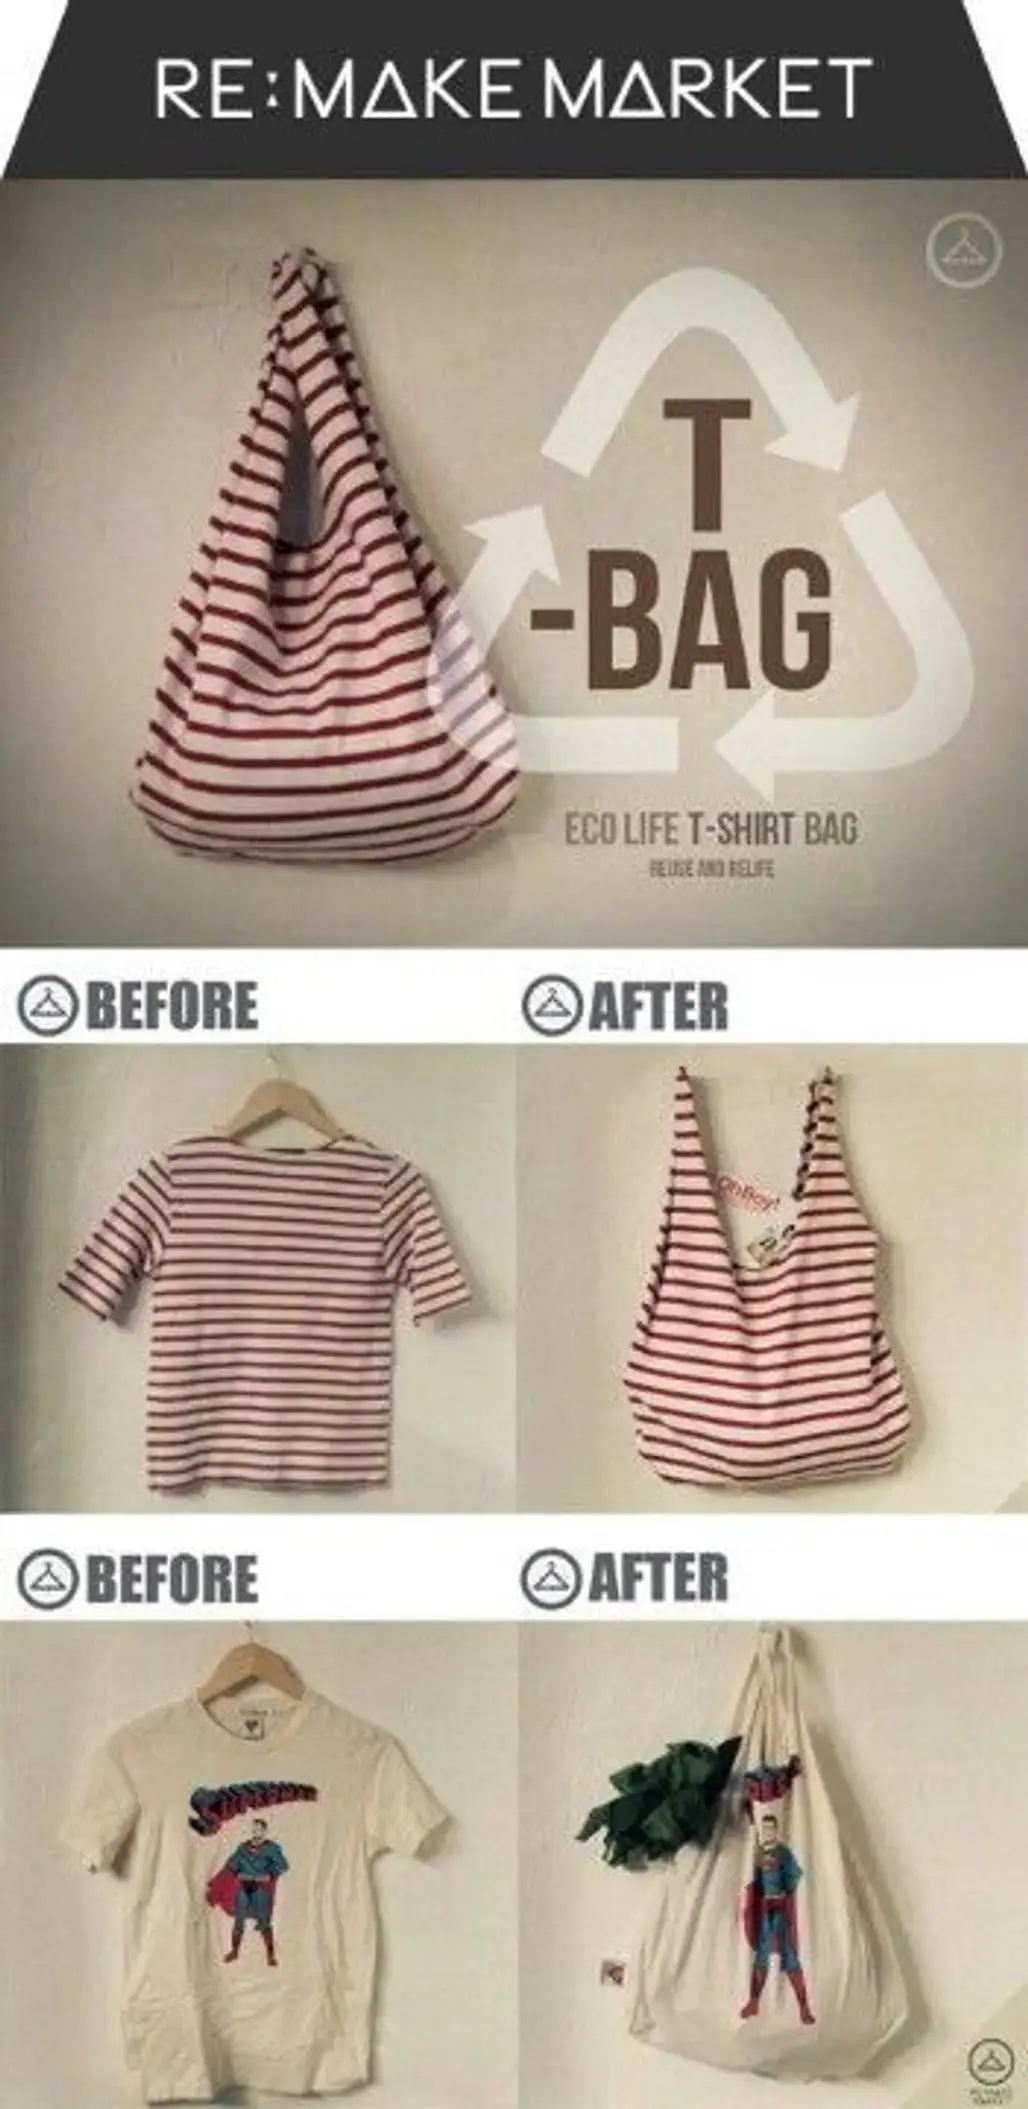 Have an Old T-Shirt You're Not Using Anymore? Recycle It into a New Bag!